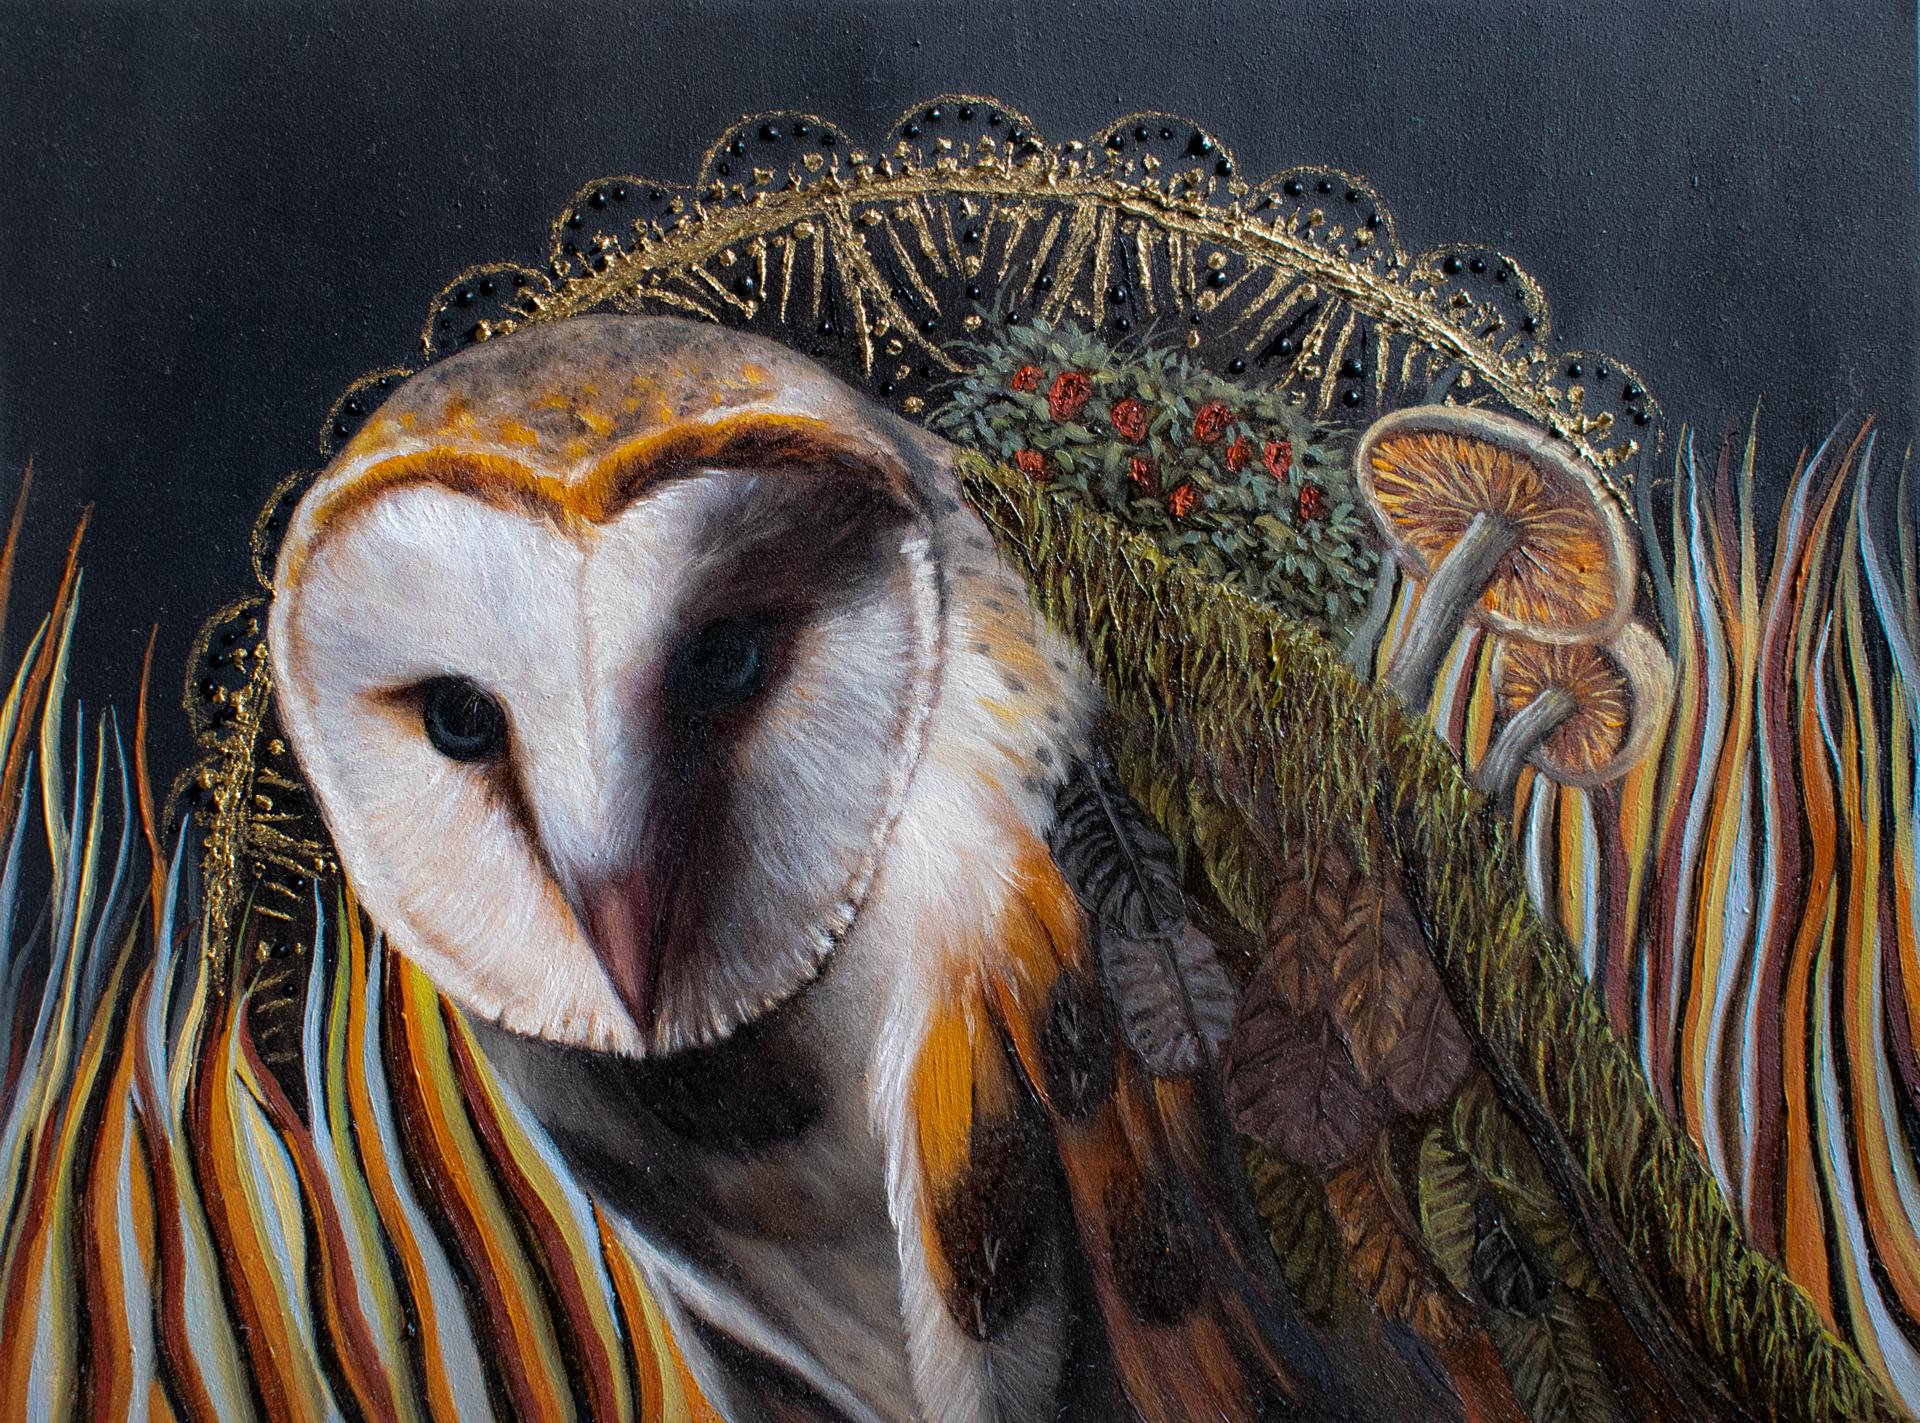 Andrada Trapnell's 'Dream Catcher' Original Owl Oil Painting with Ornate Frame For Sale 3